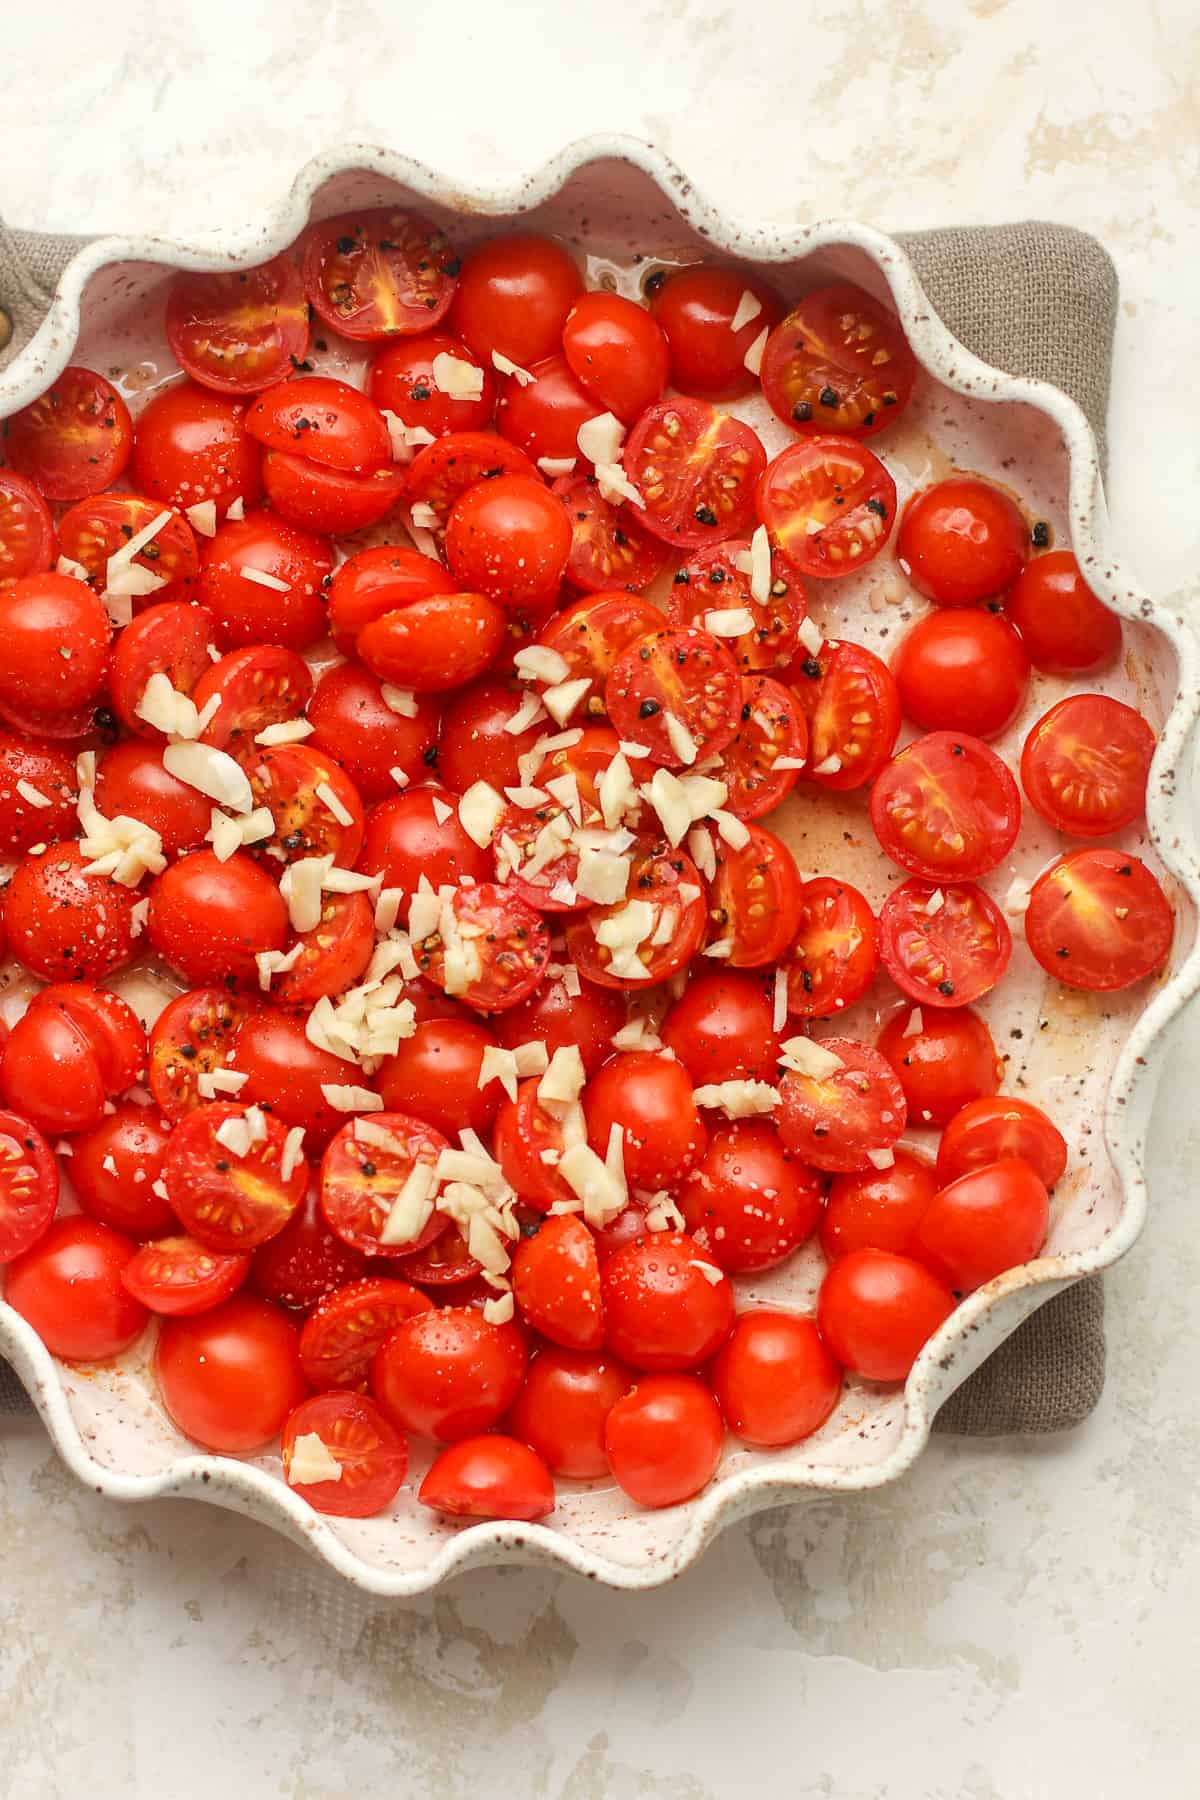 A dish of roasted tomatoes and garlic on top.